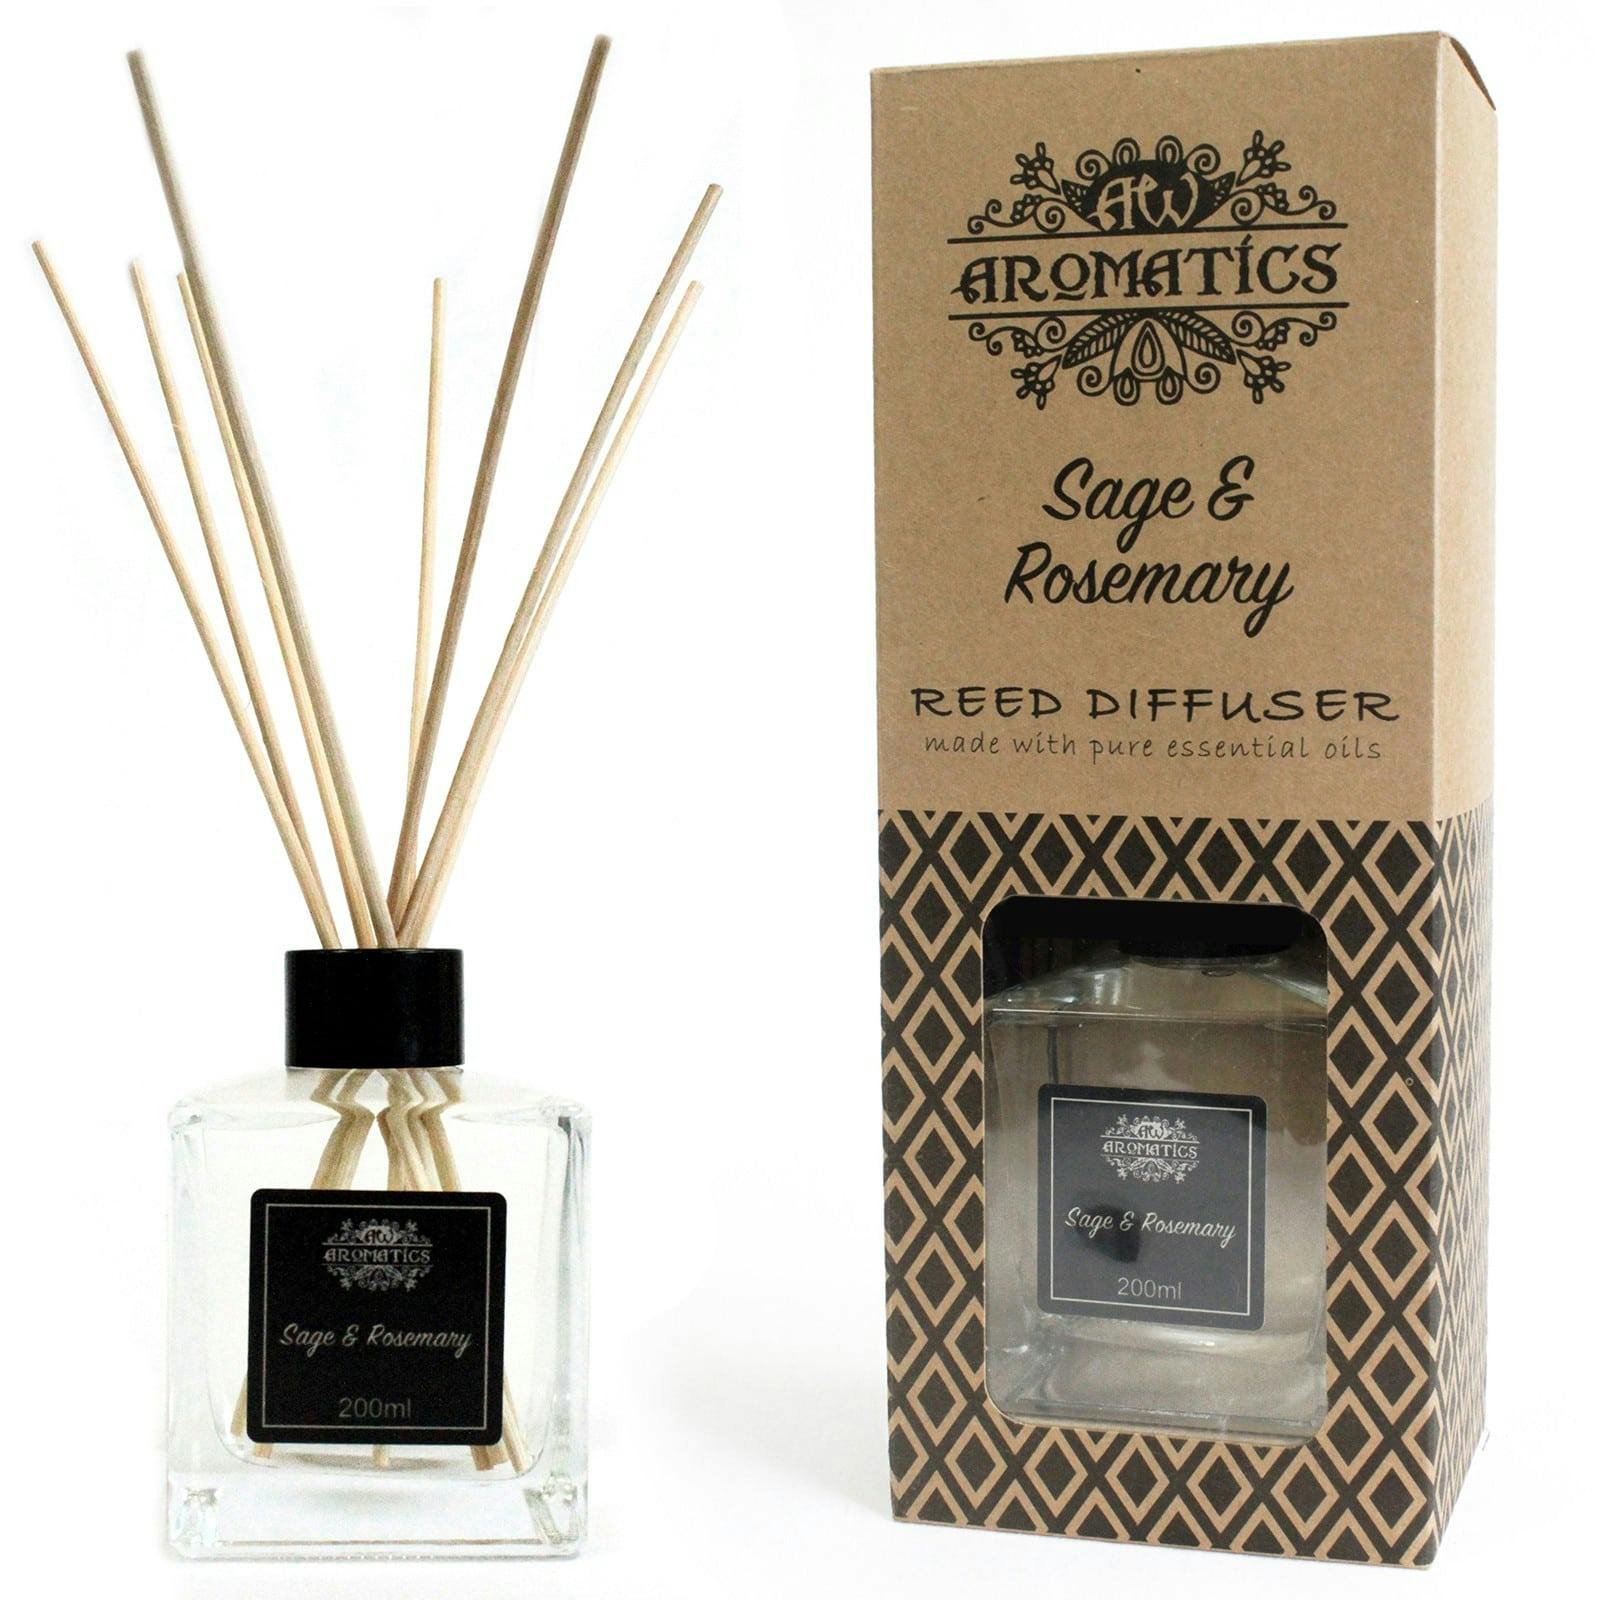 200ml Sage & Rosemary Essential Oil Reed Diffuser Image